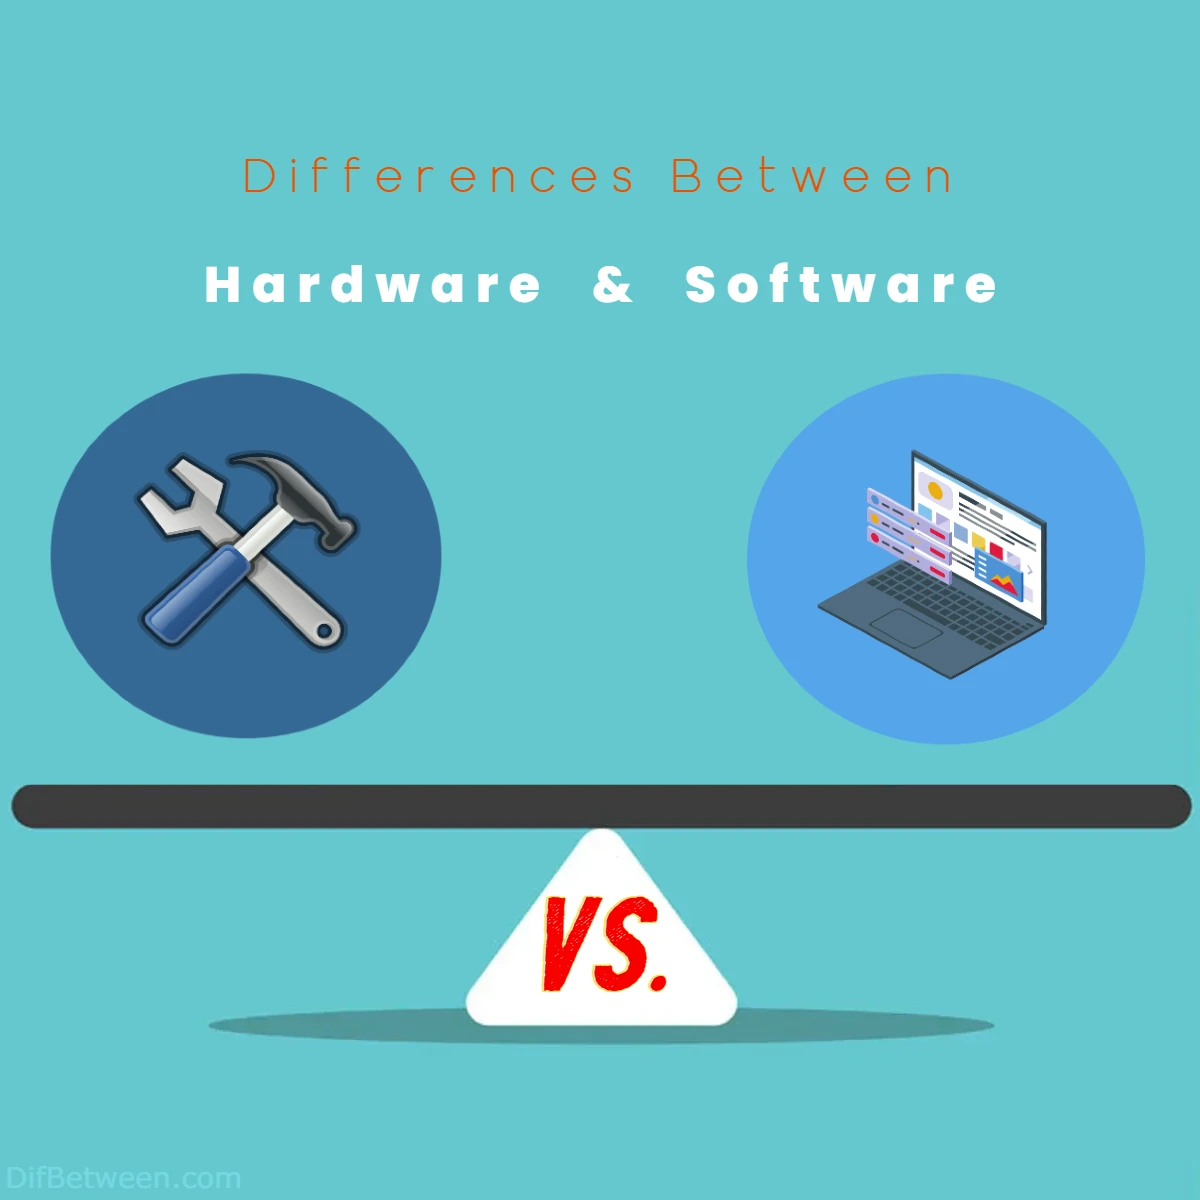 Differences Between Hardware vs Software